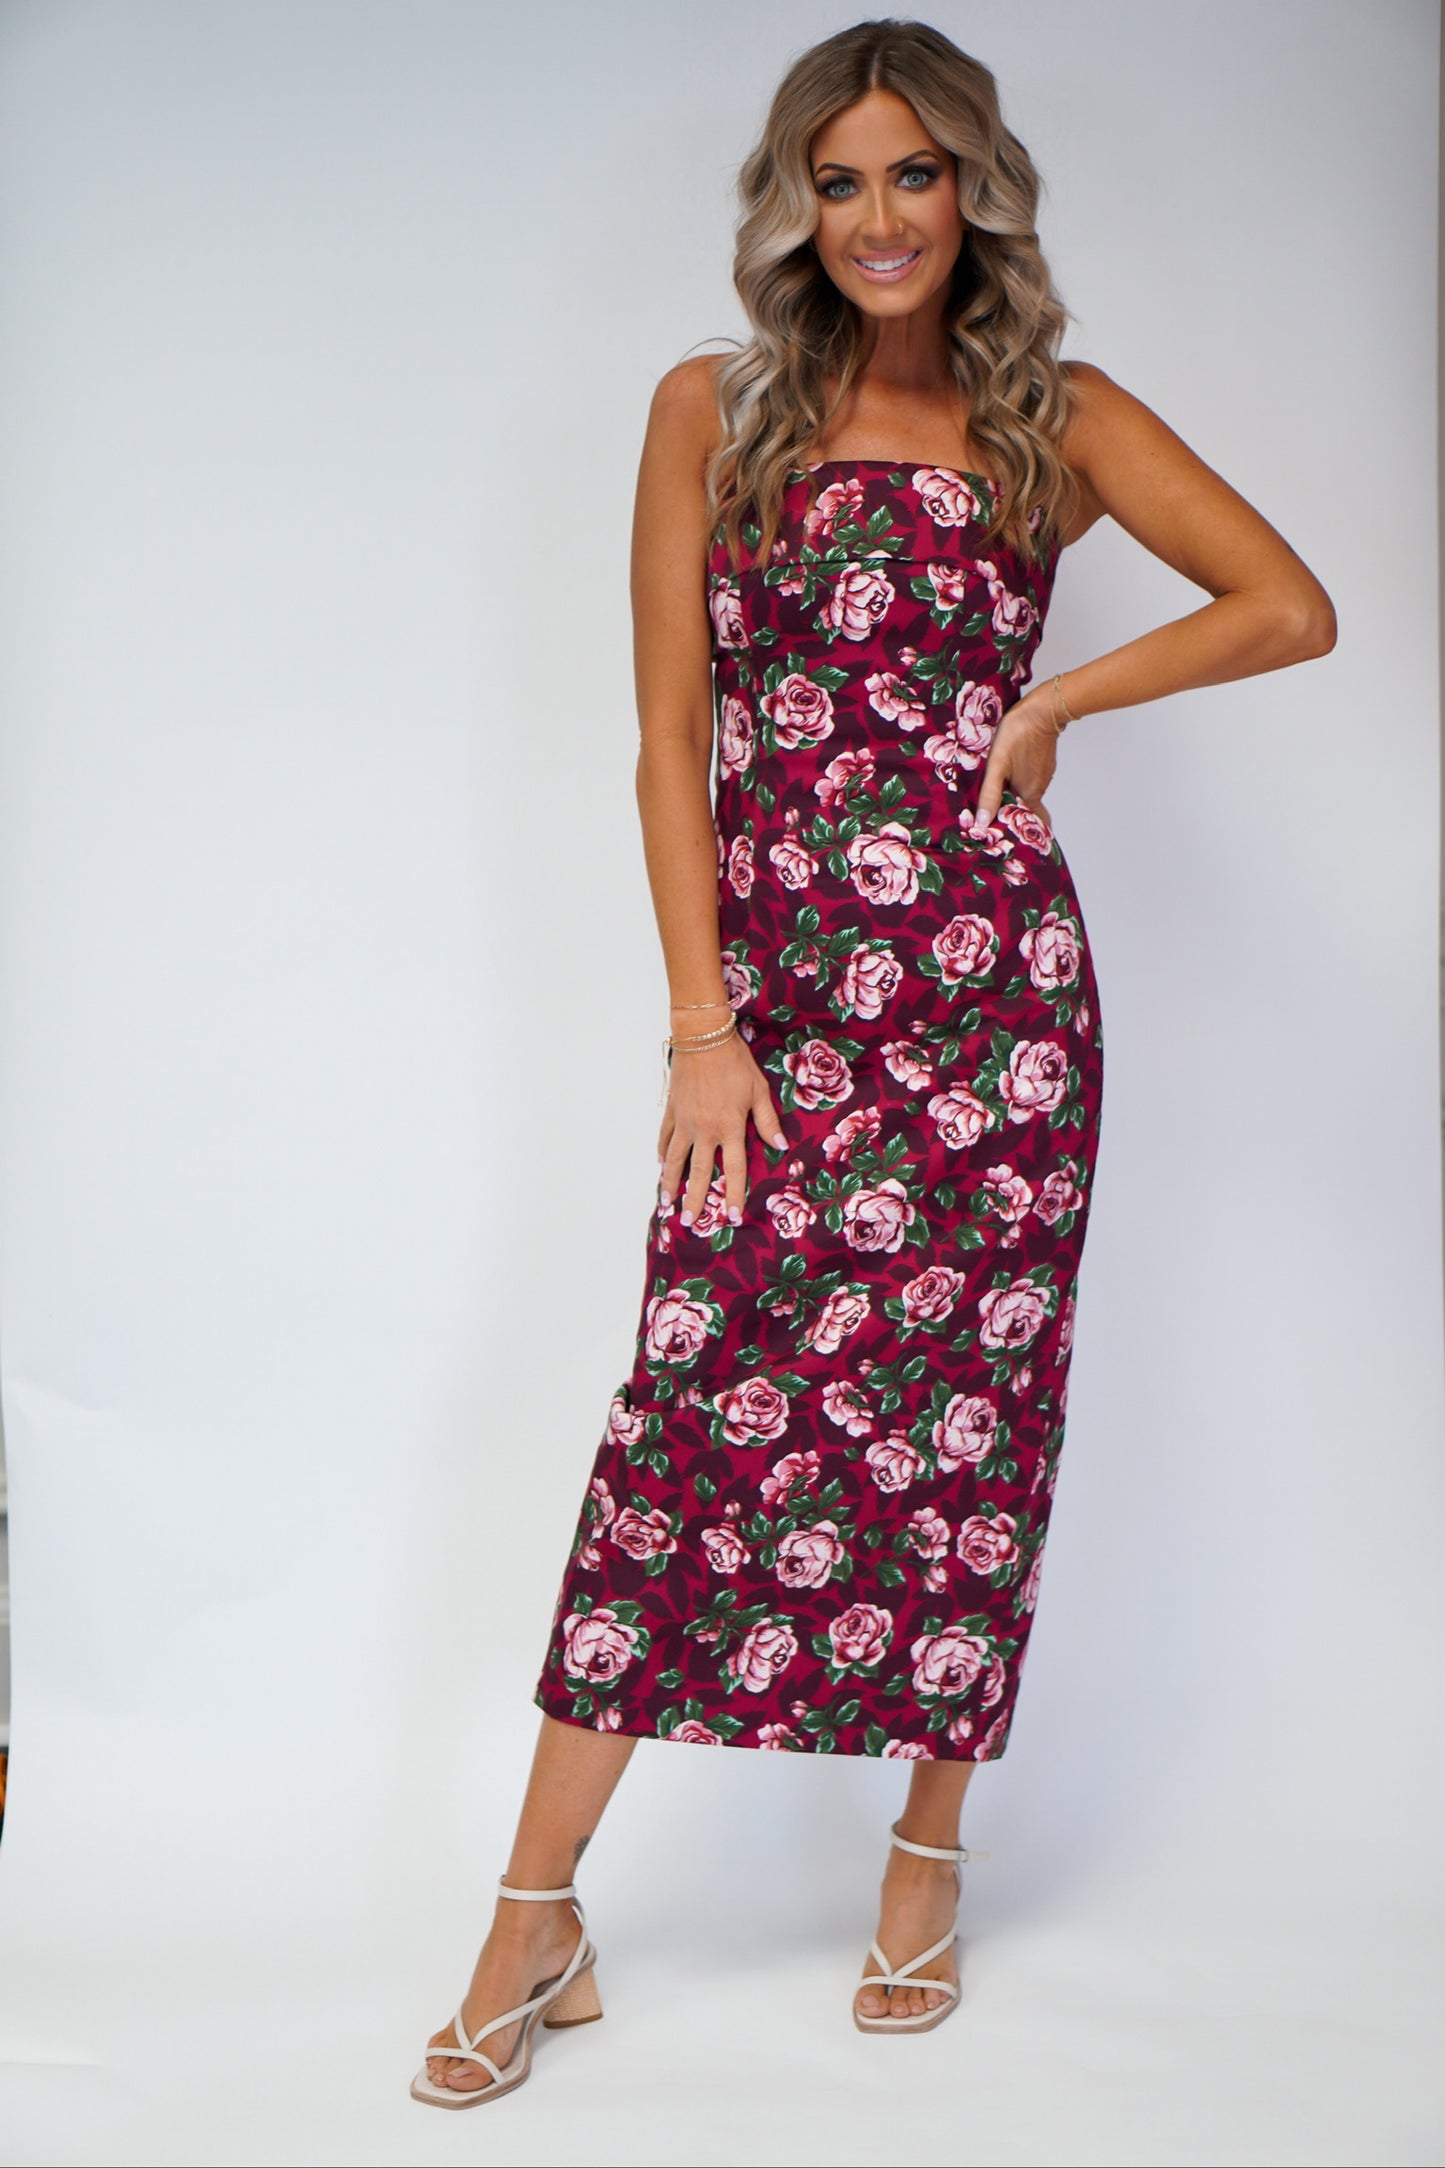 girl wearing tube dress with floral detail maxi style with hand on hip